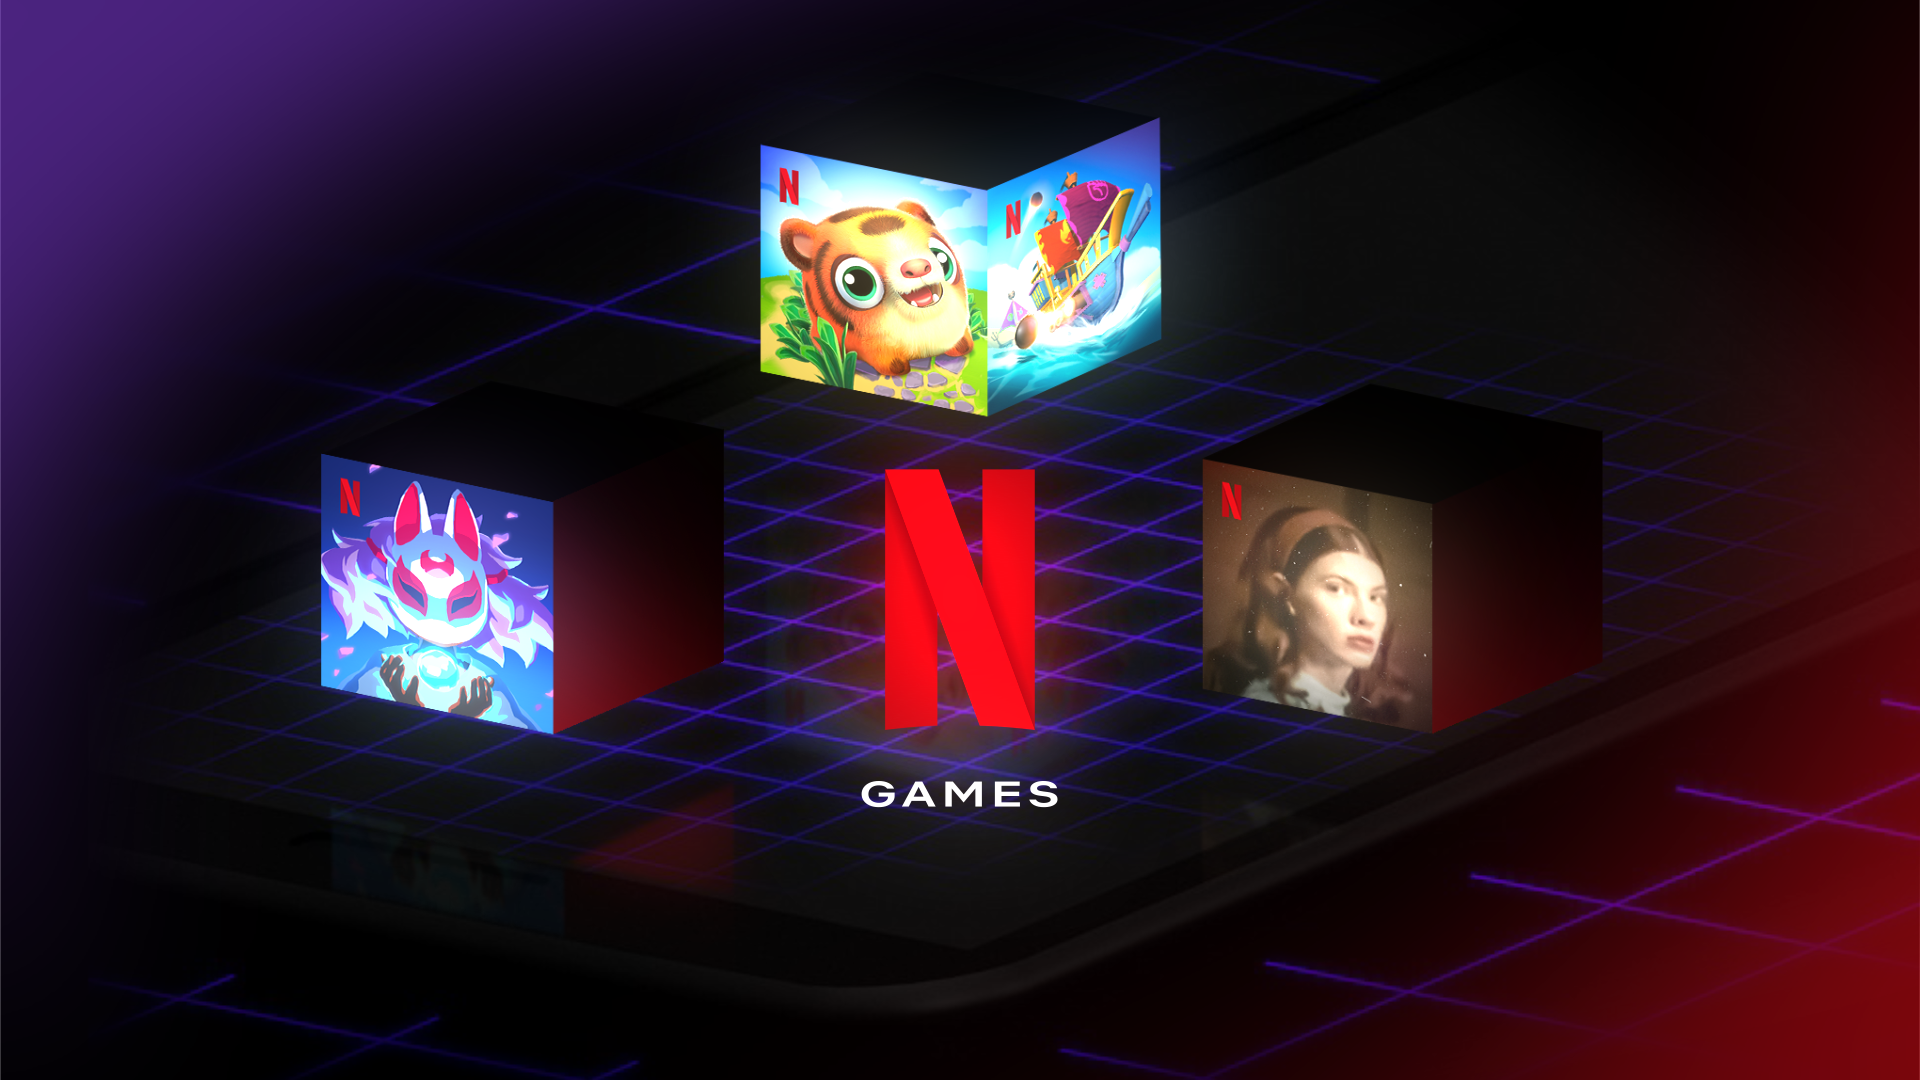 Netflix Latest Launch of the Year “Game Control App to Play Games on TV”